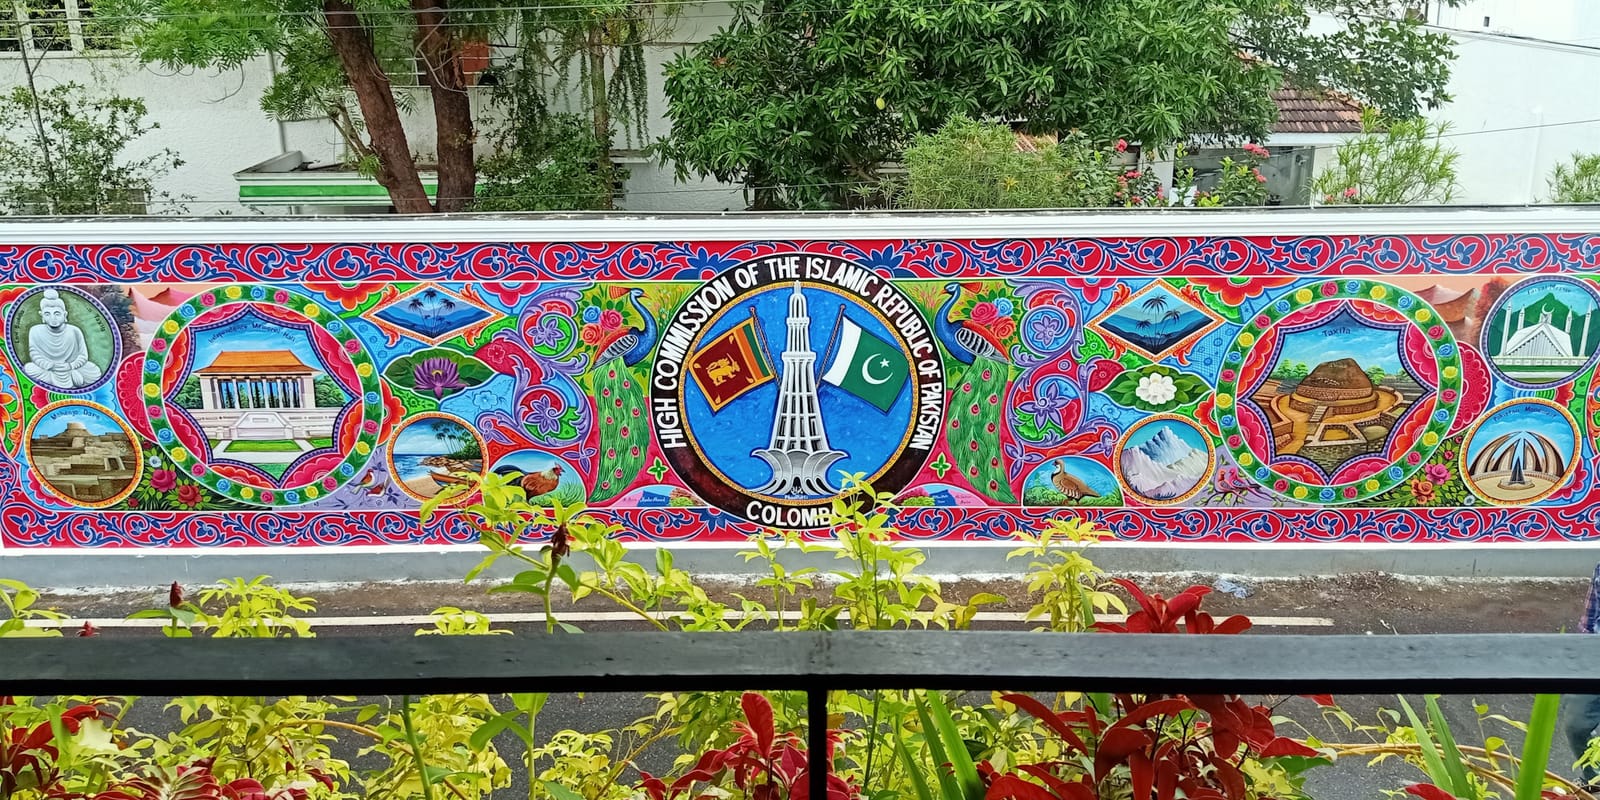 Brightly coloured decorative mural on a wall surrounding a garden, photographed from a viewing point above.